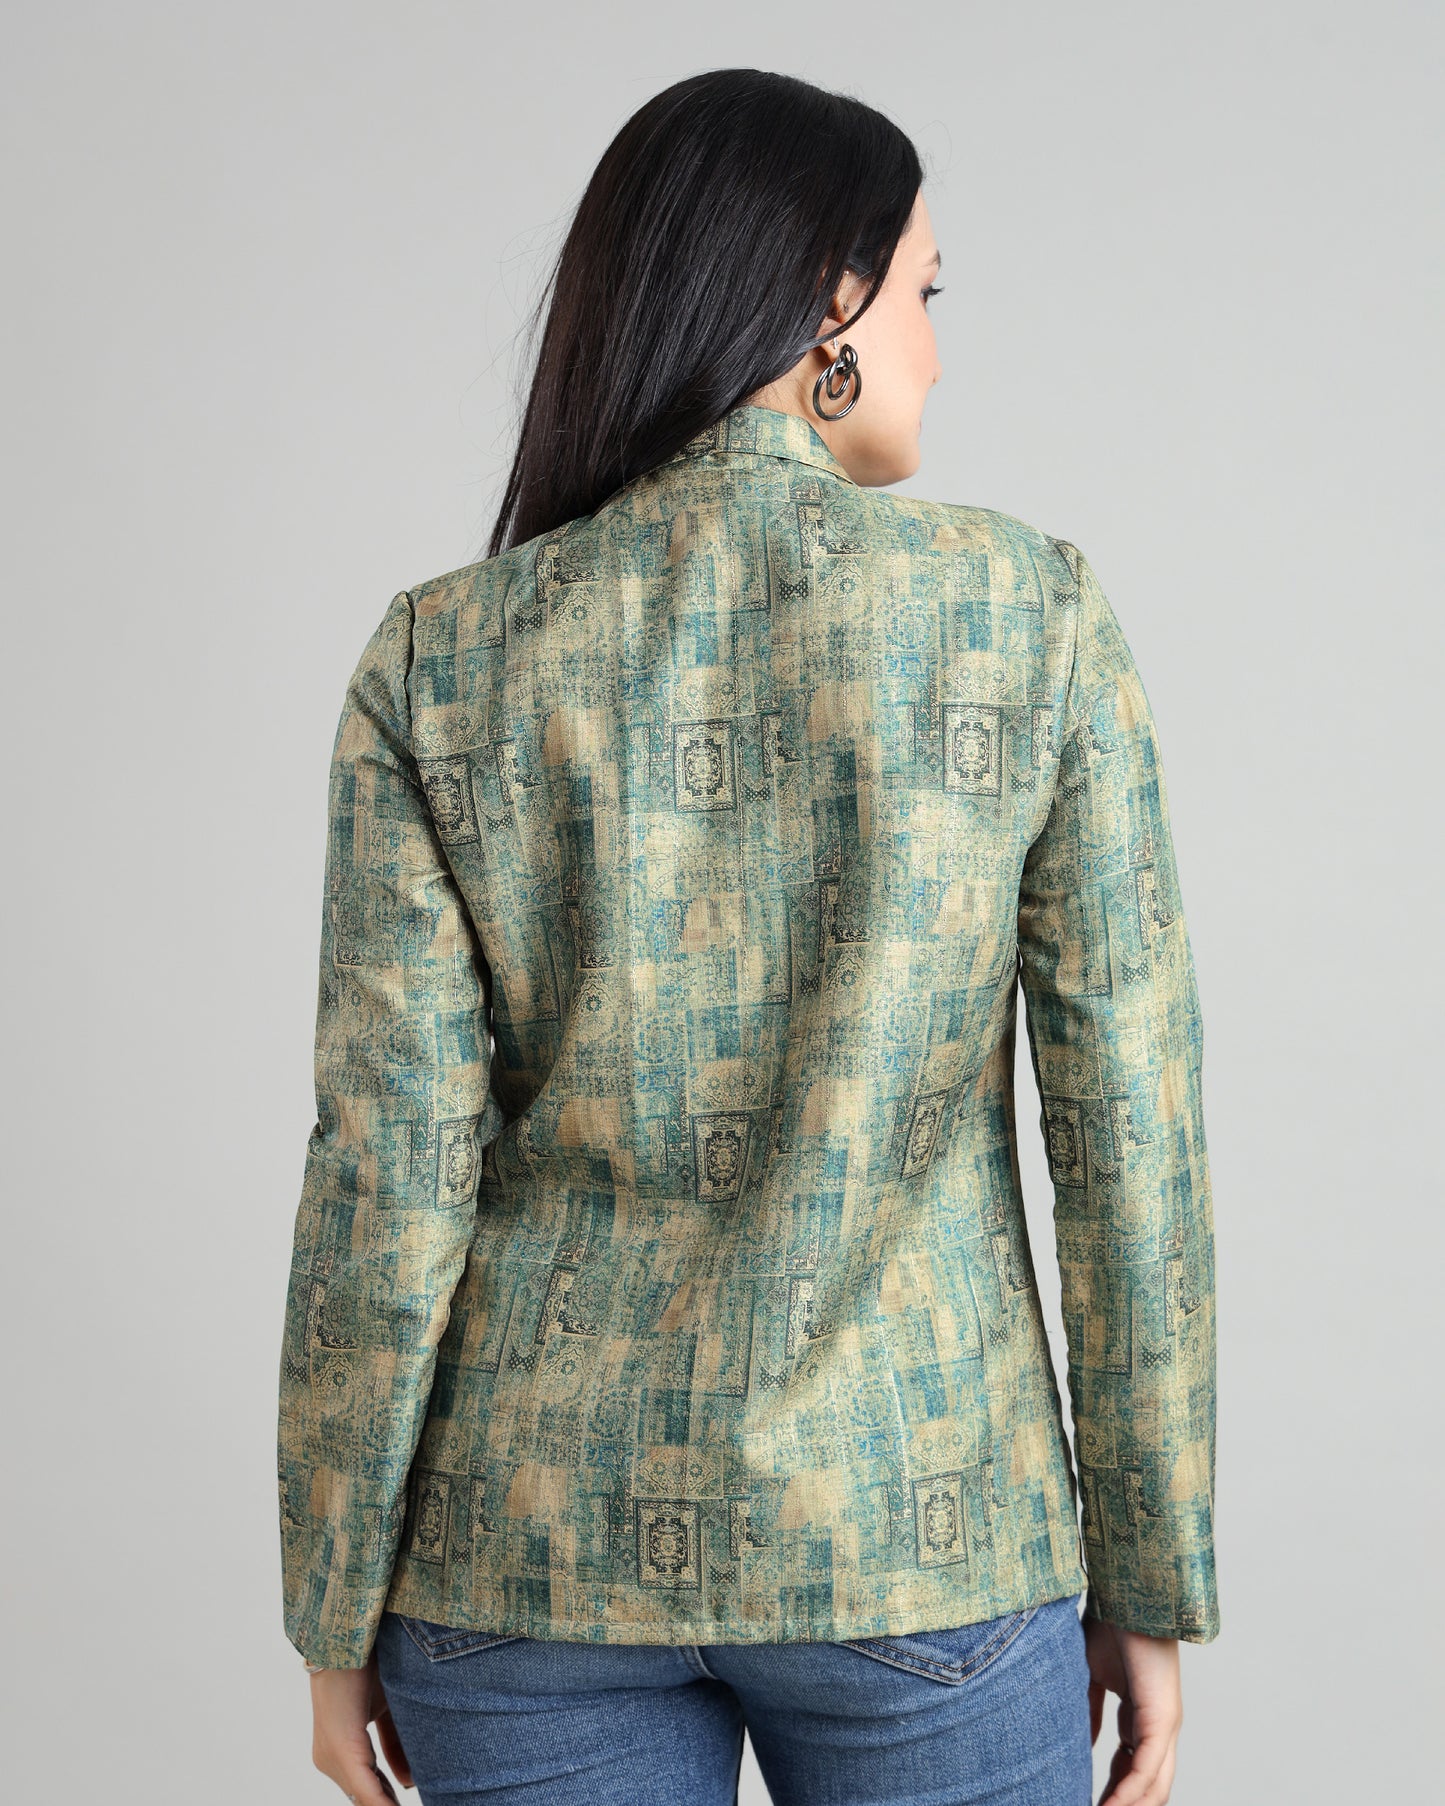 Timeless Tailoring: The Impeccable Women's Jacket